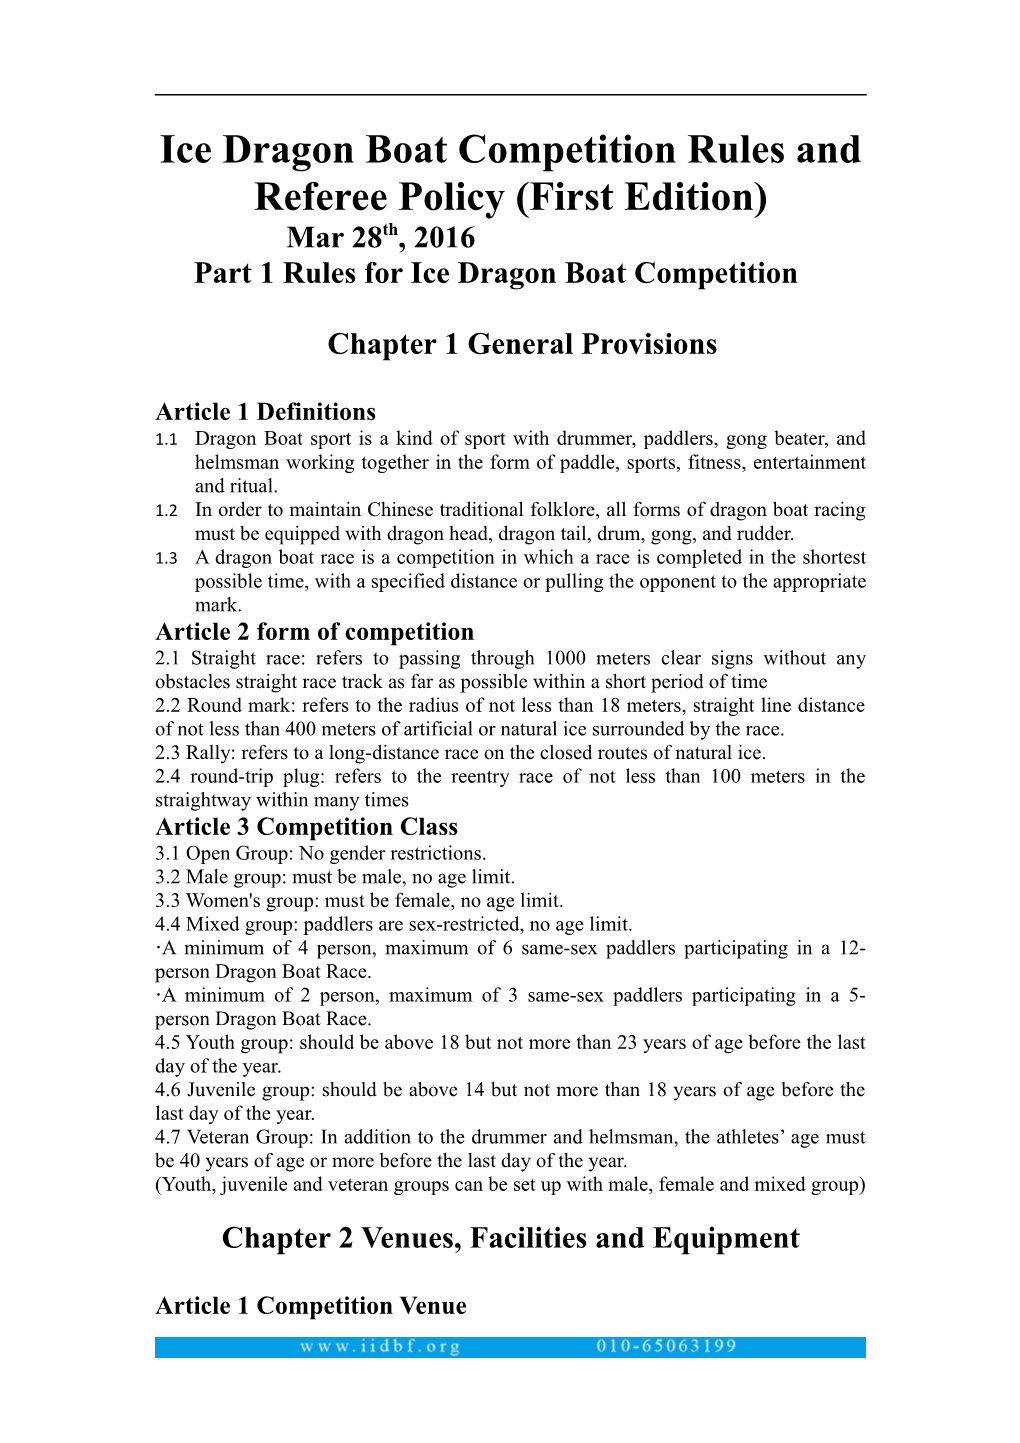 Ice Dragon Boat Competition Rules and Referee Policy (First Edition)